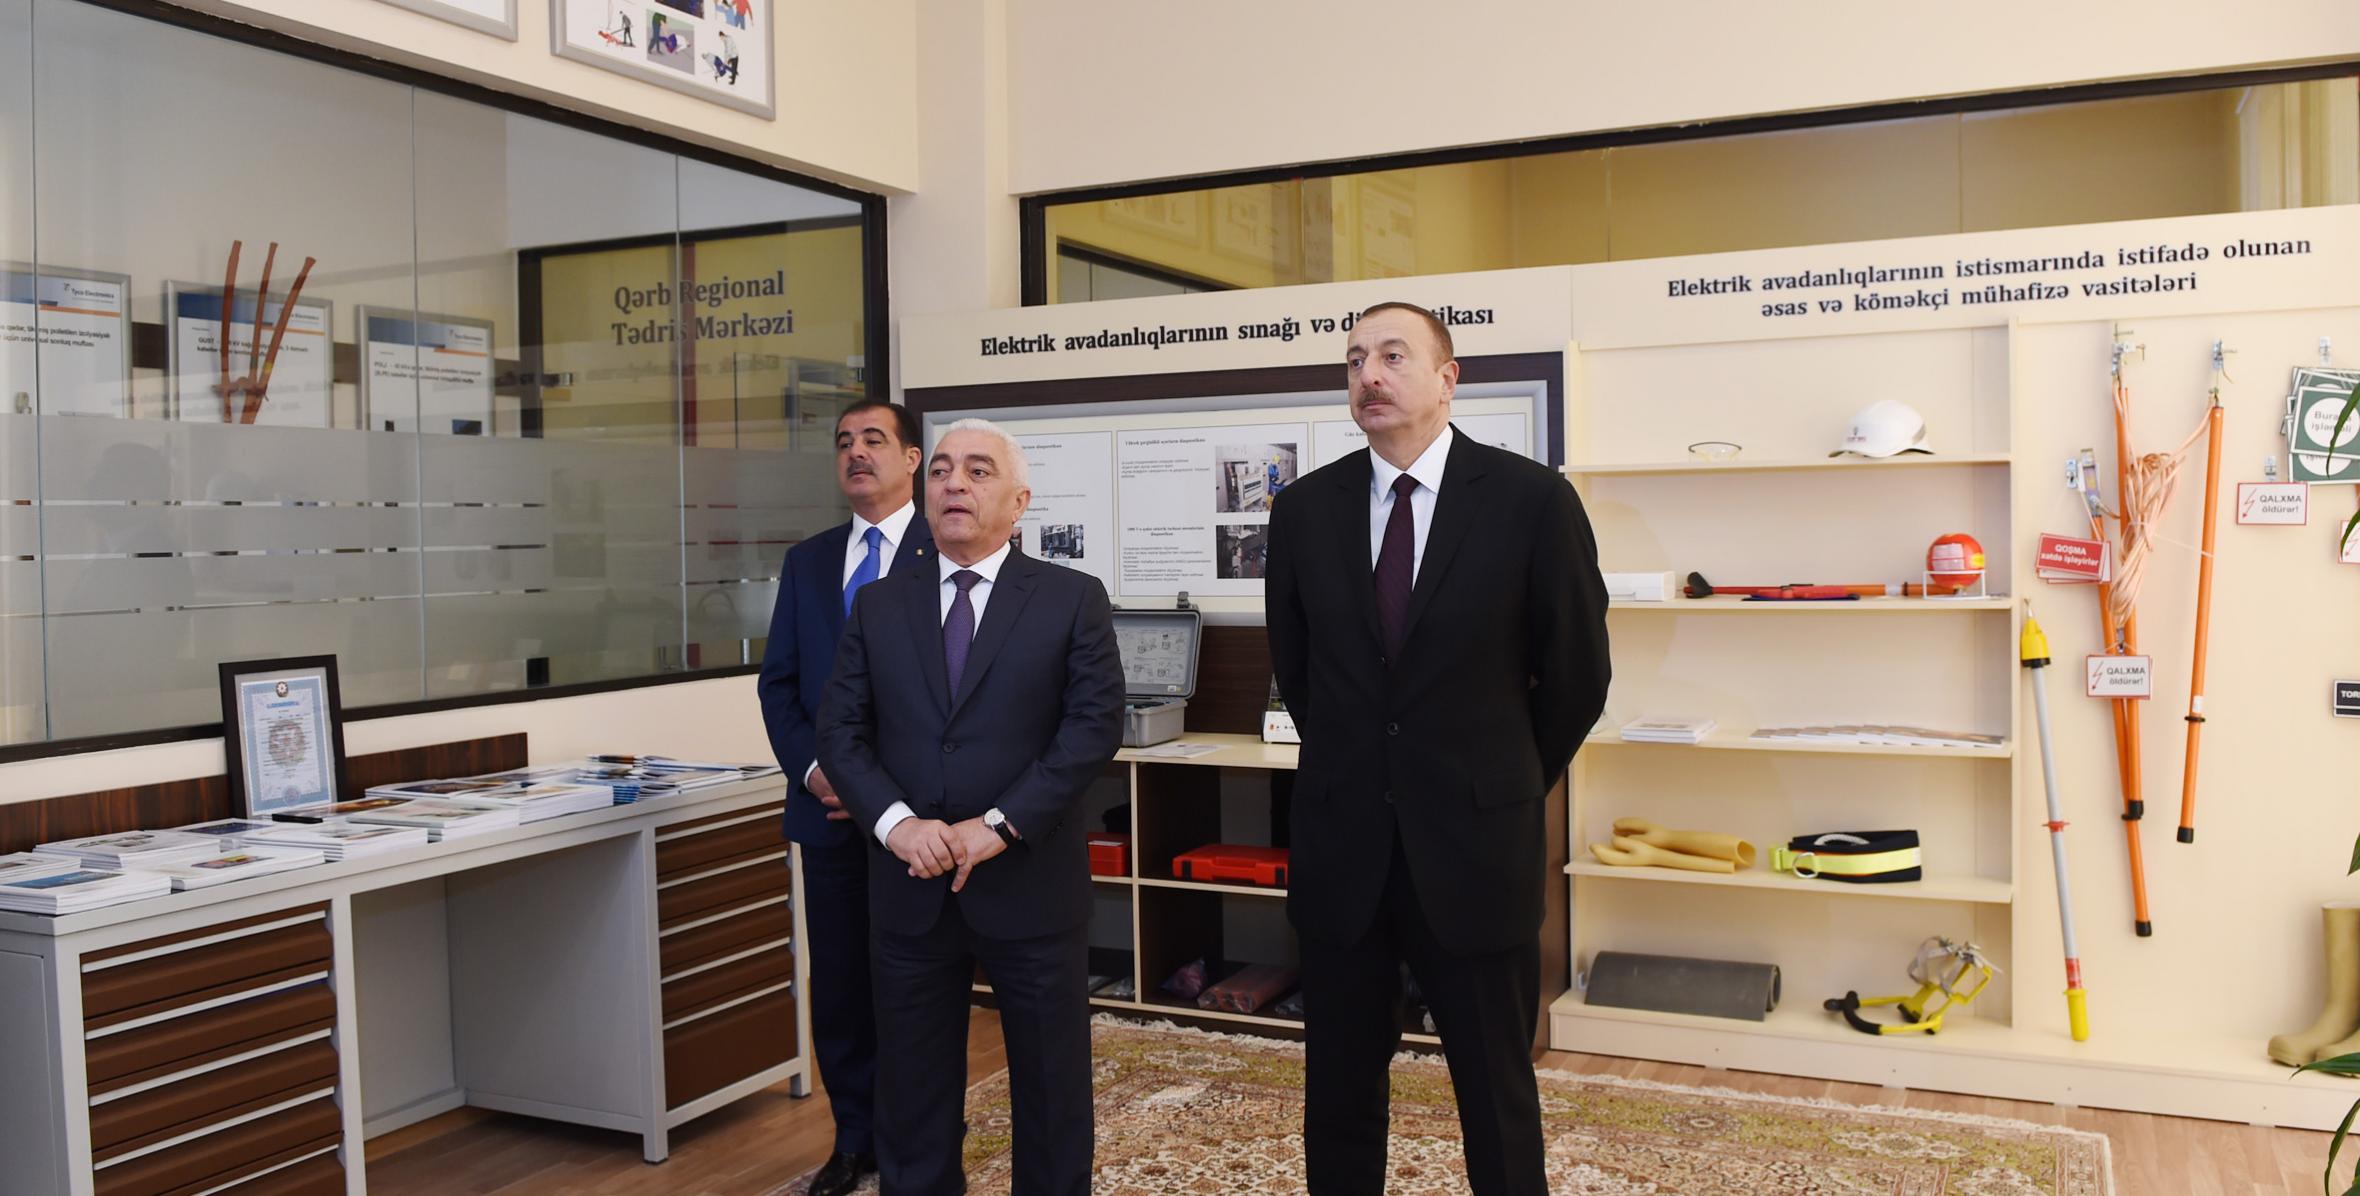 Ilham Aliyev attended the opening of “Nizami” electrical substation in Ganja